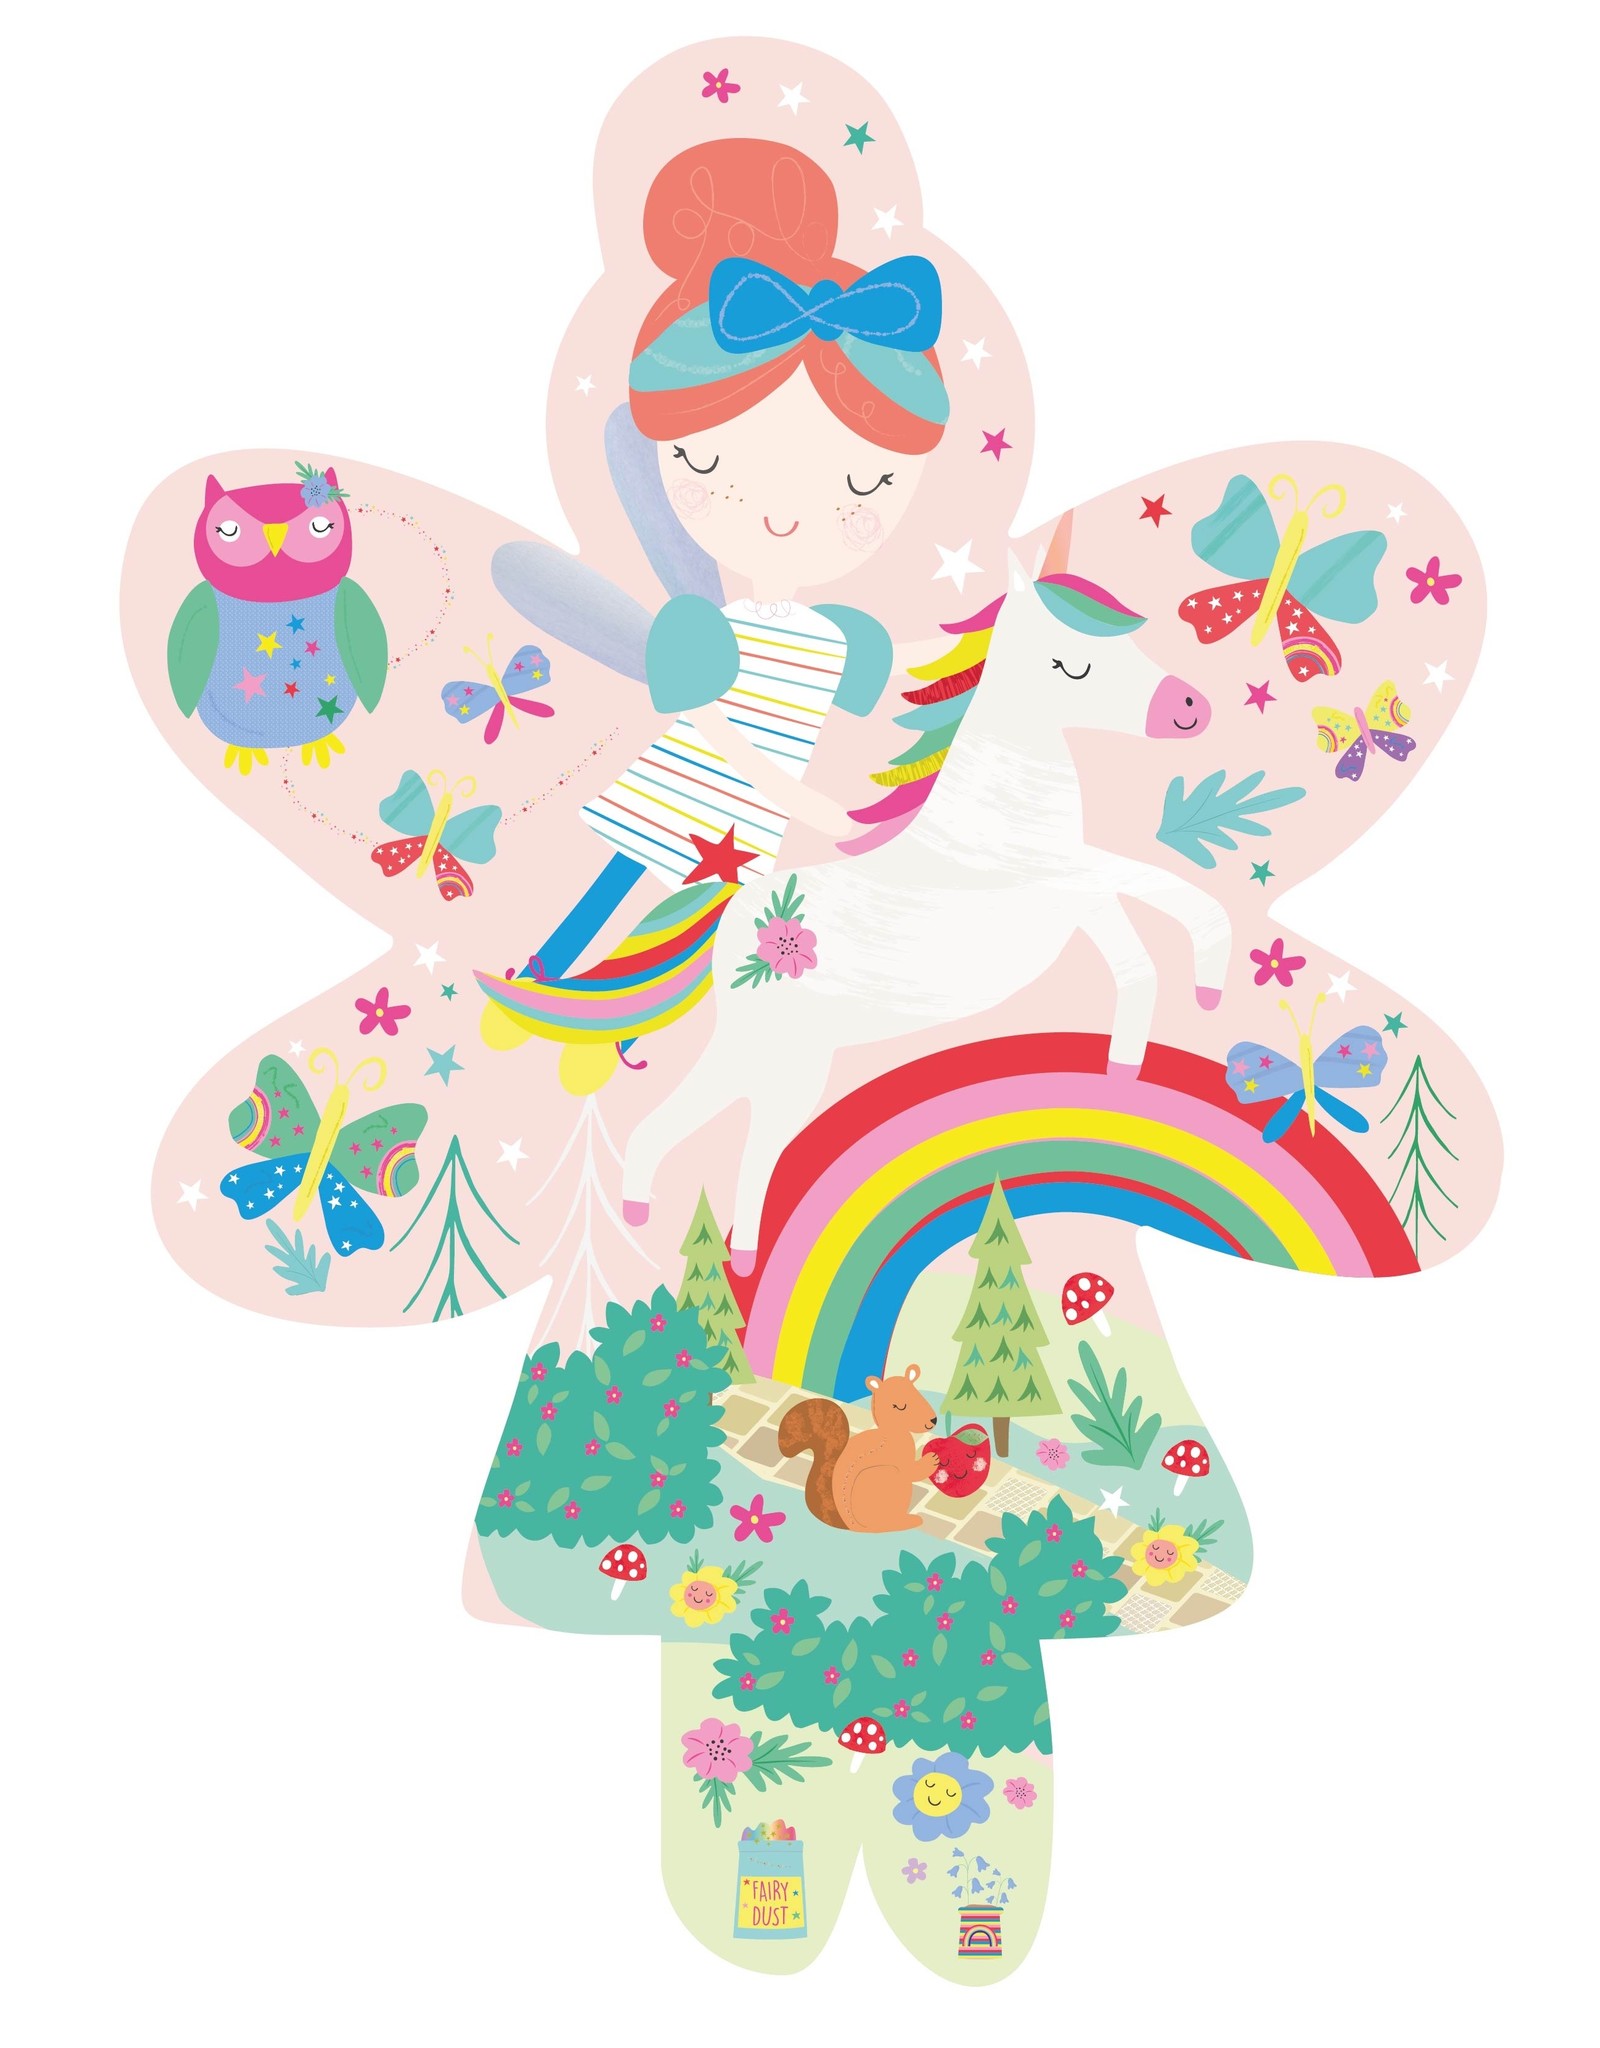 Floss and Rock Rainbow Fairy 20pc Puzzle